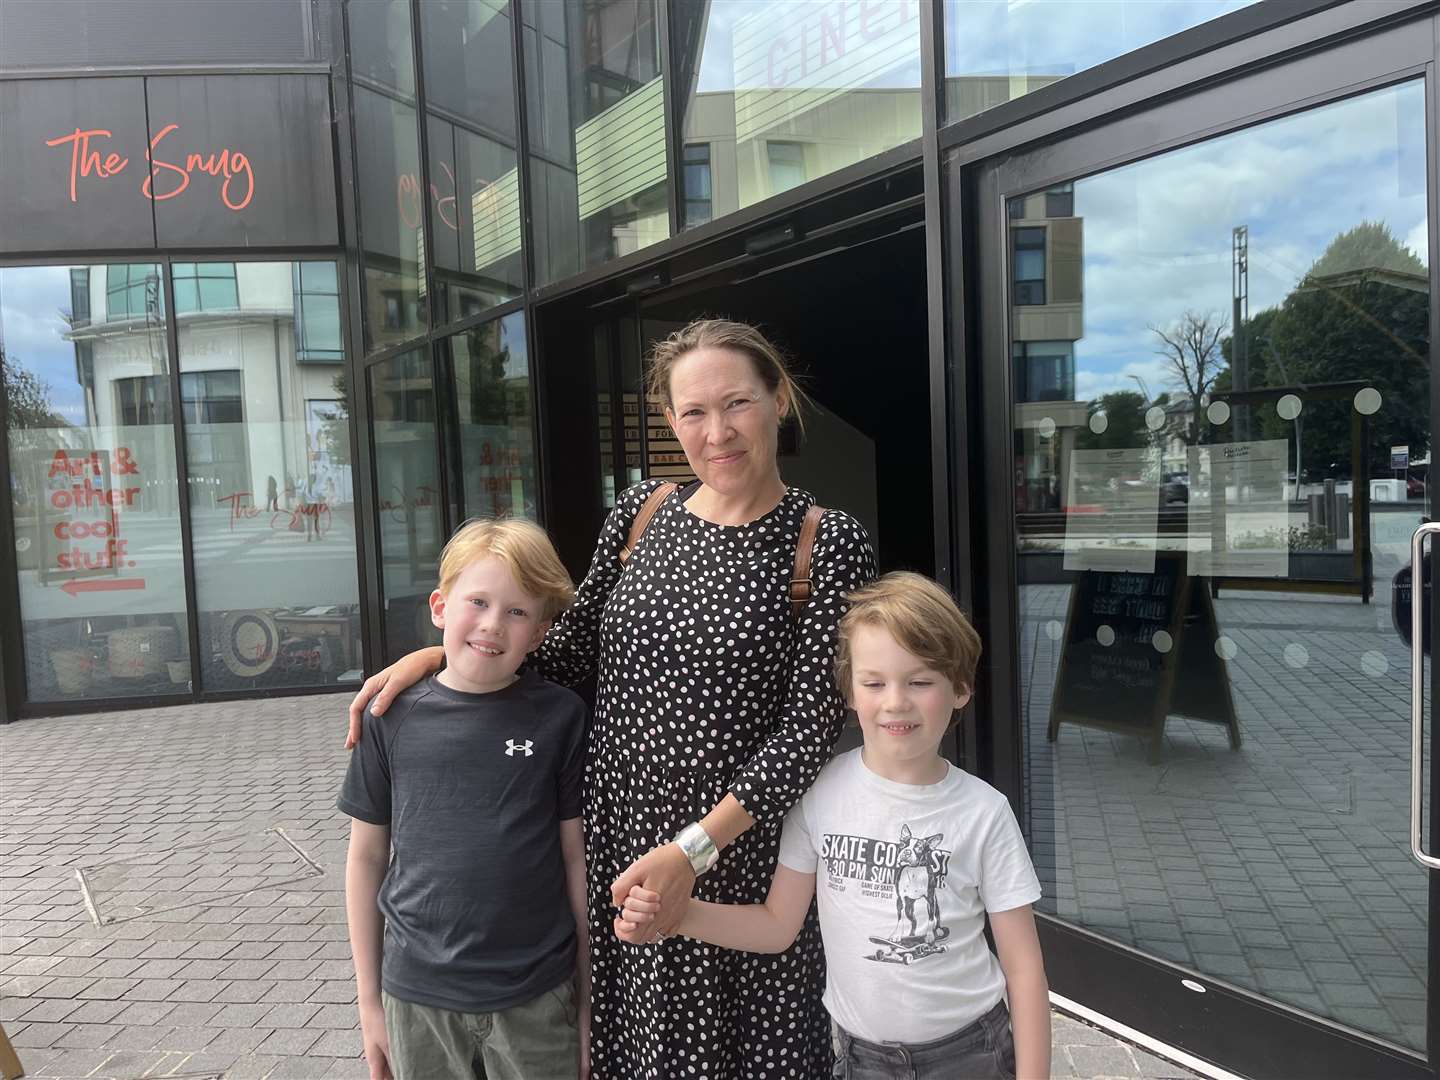 Emma Chittock said she regularly takes her sons to the cinema